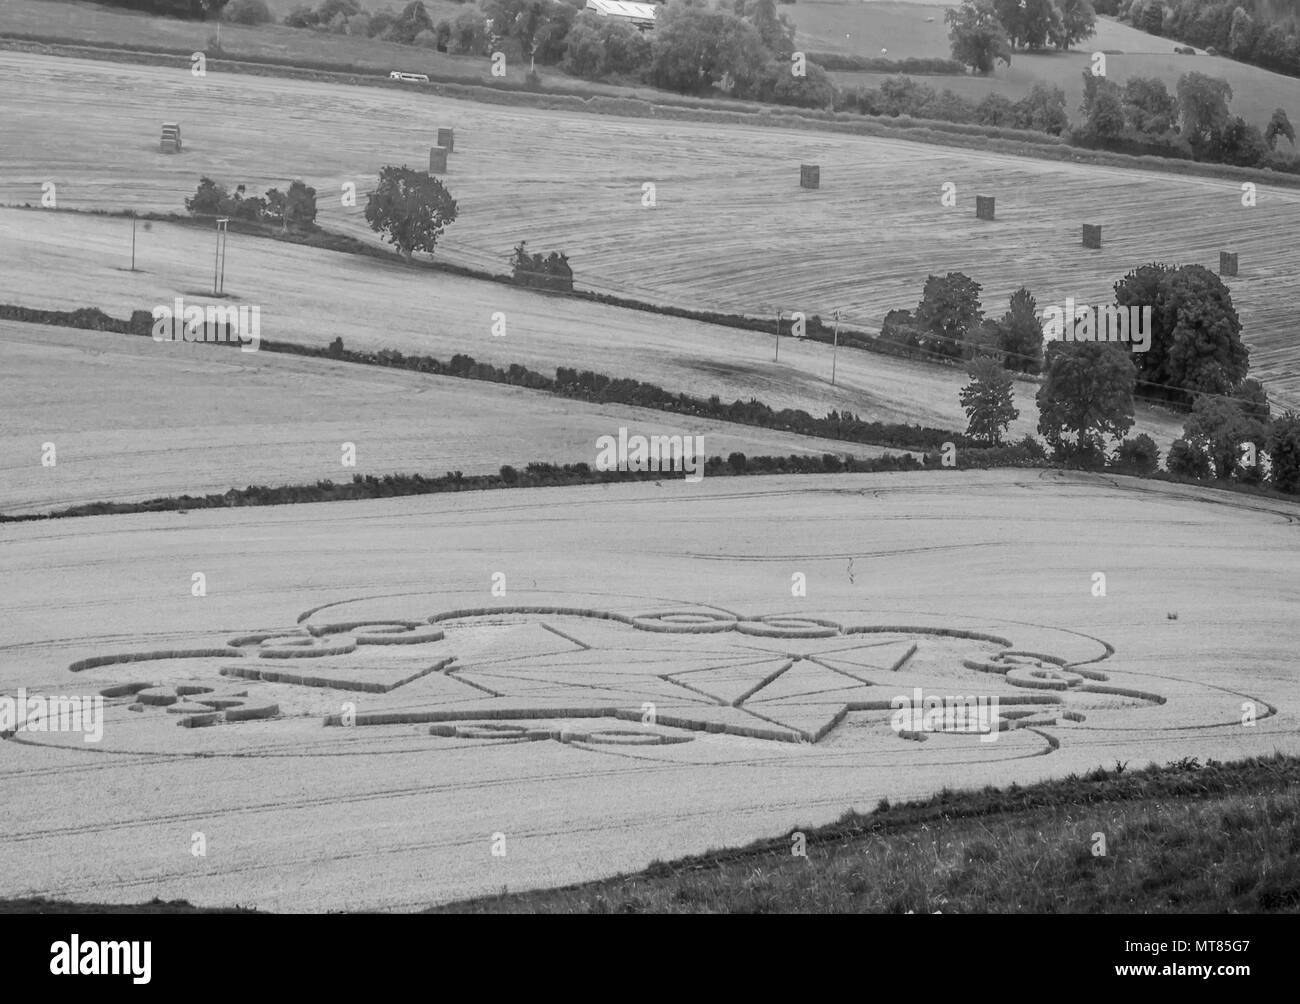 Wiltshire UK - The crop circle - who did it ? - Black and White photography Stock Photo